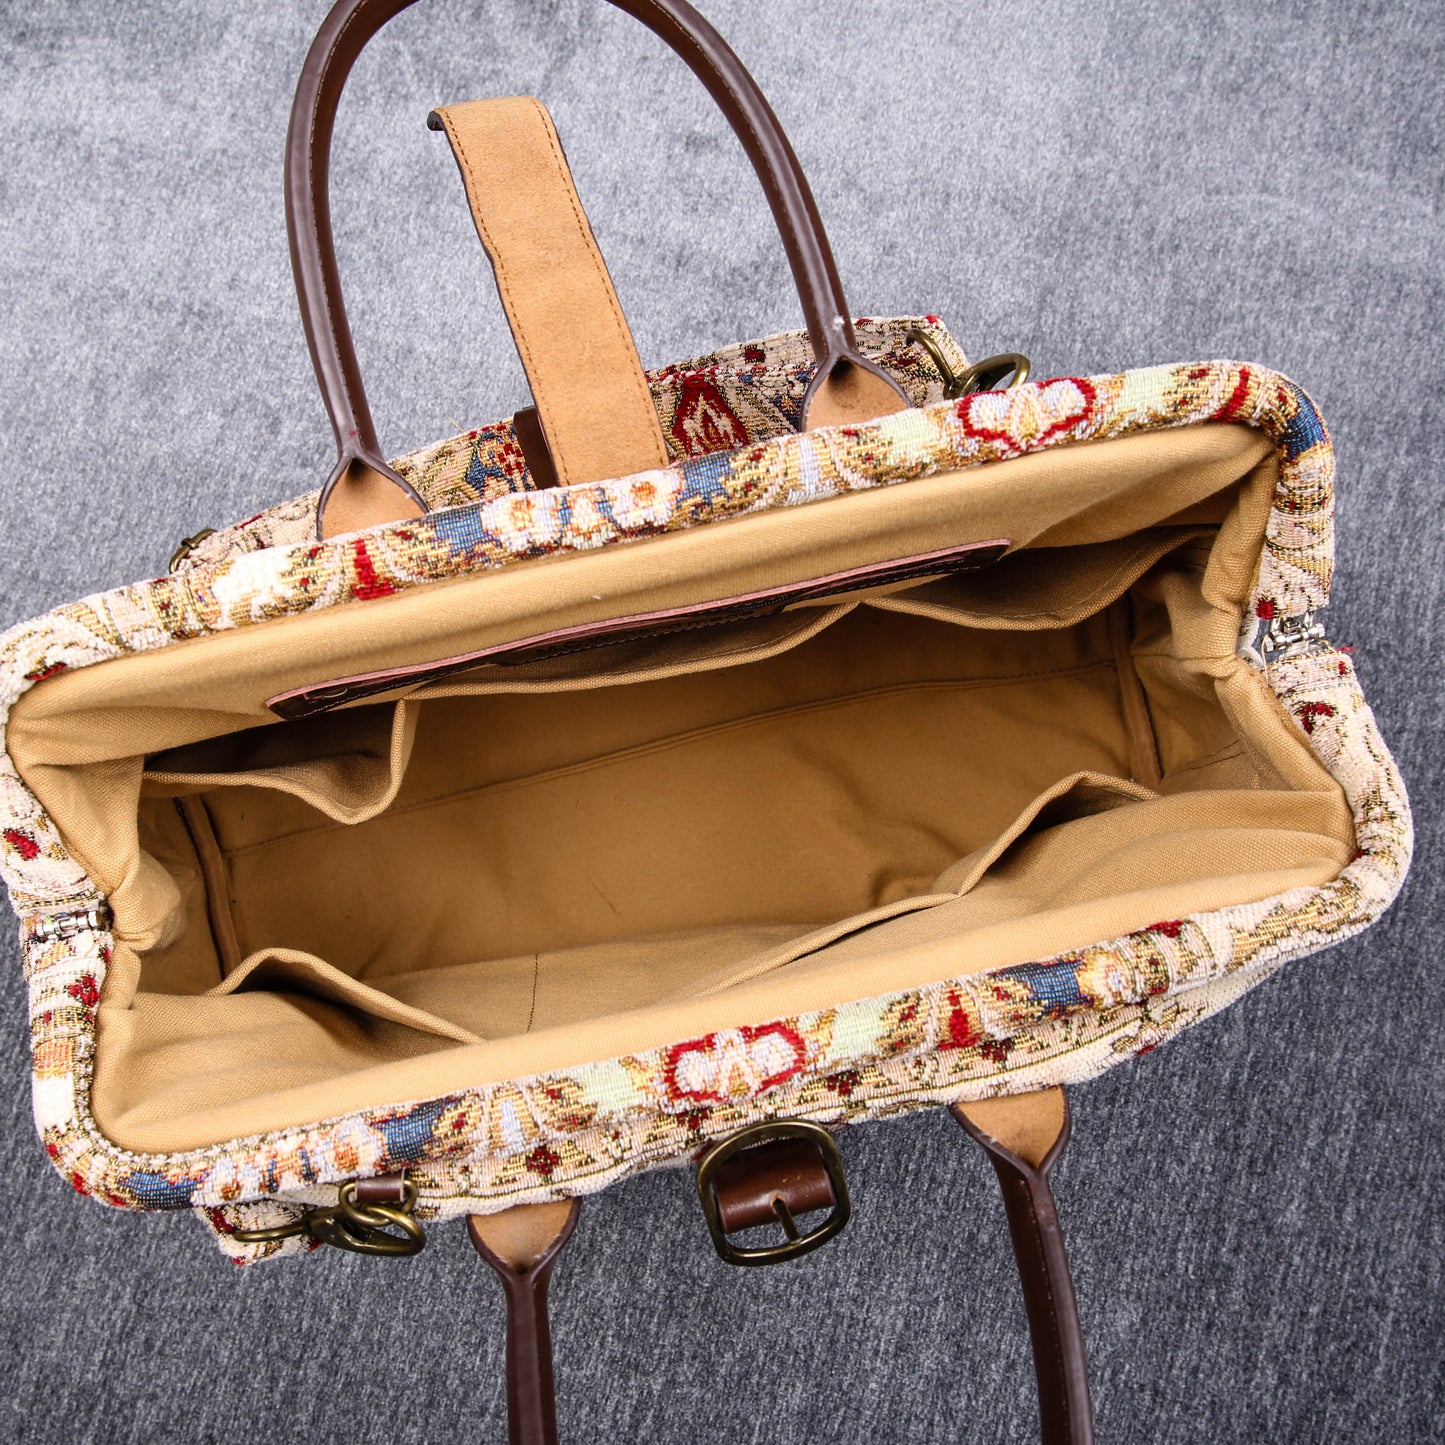 Mary Poppins Carpet Bag Golden Age Wine